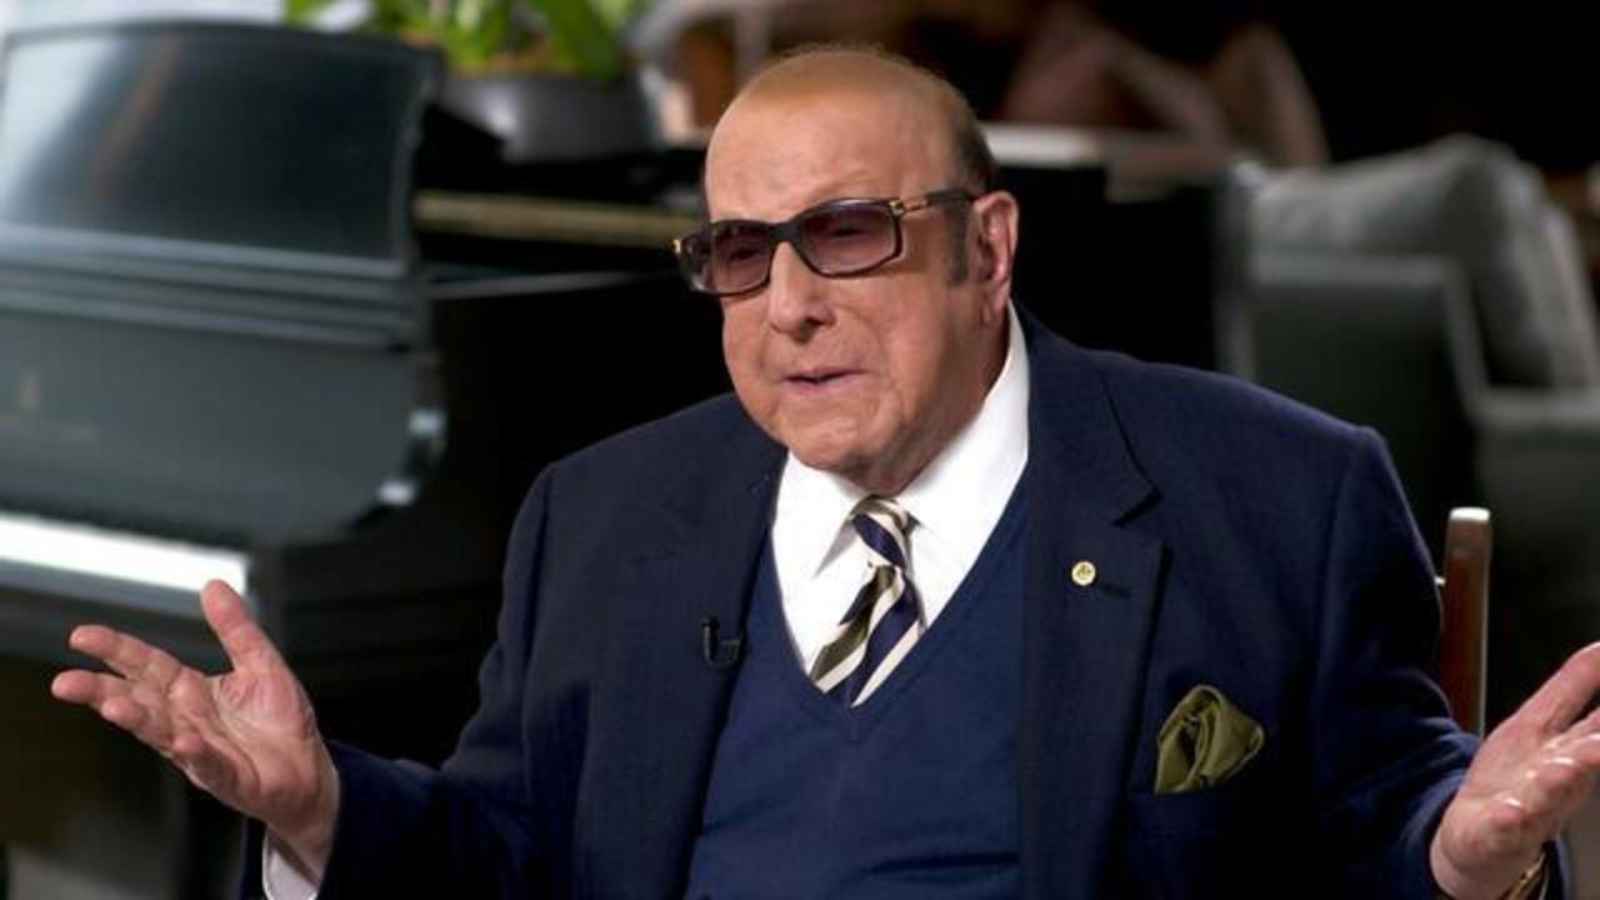 Clive Davis Wife: Is Clive Davis Married Or Not?